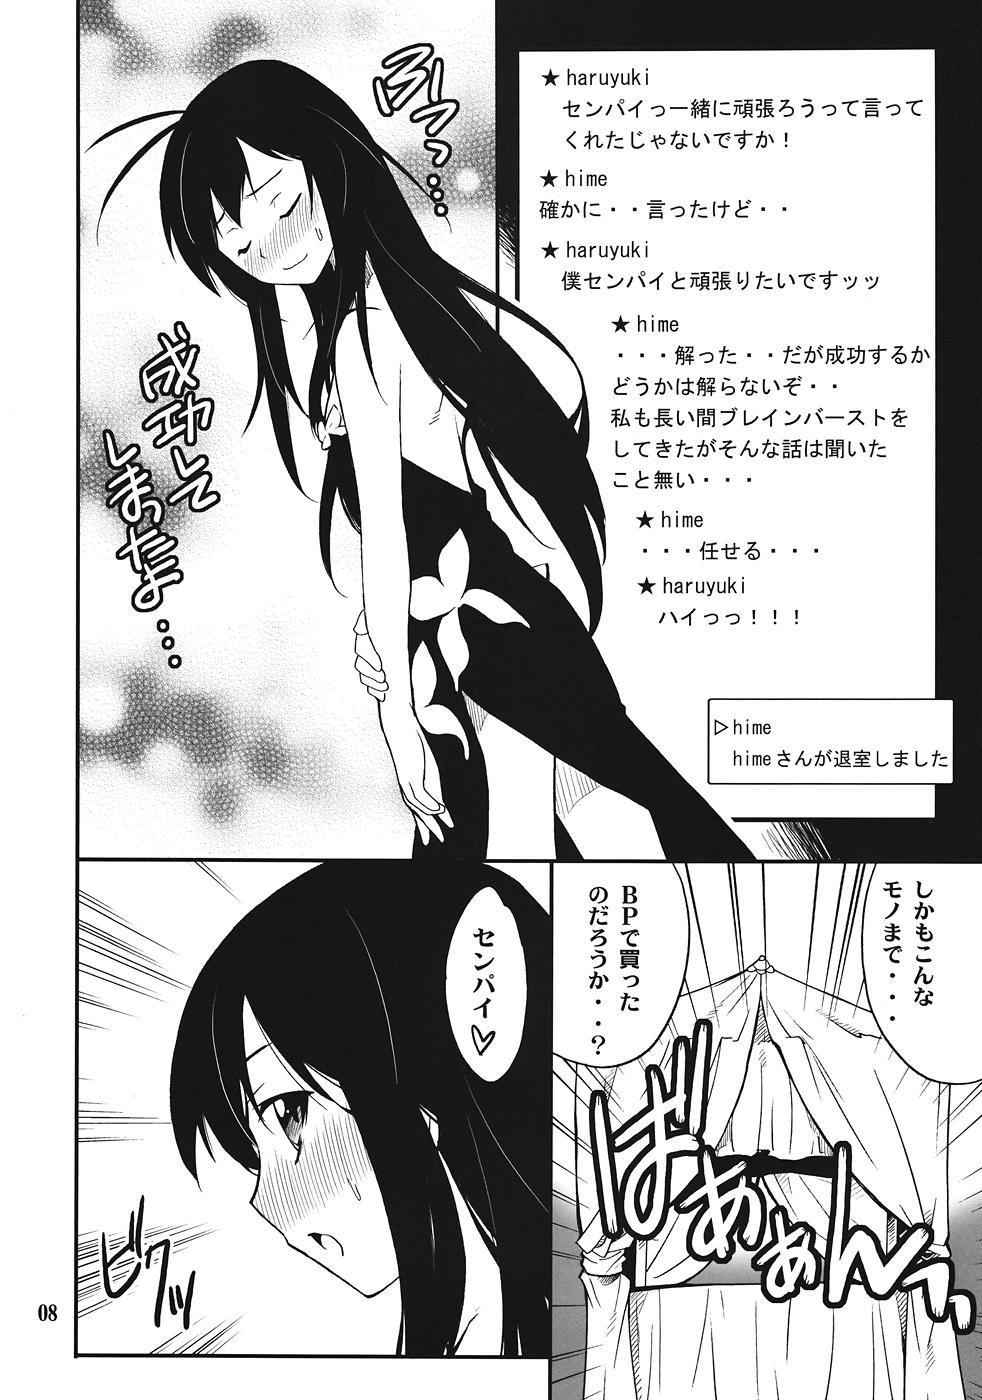 Filipina Another World - Accel world Staxxx - Page 7